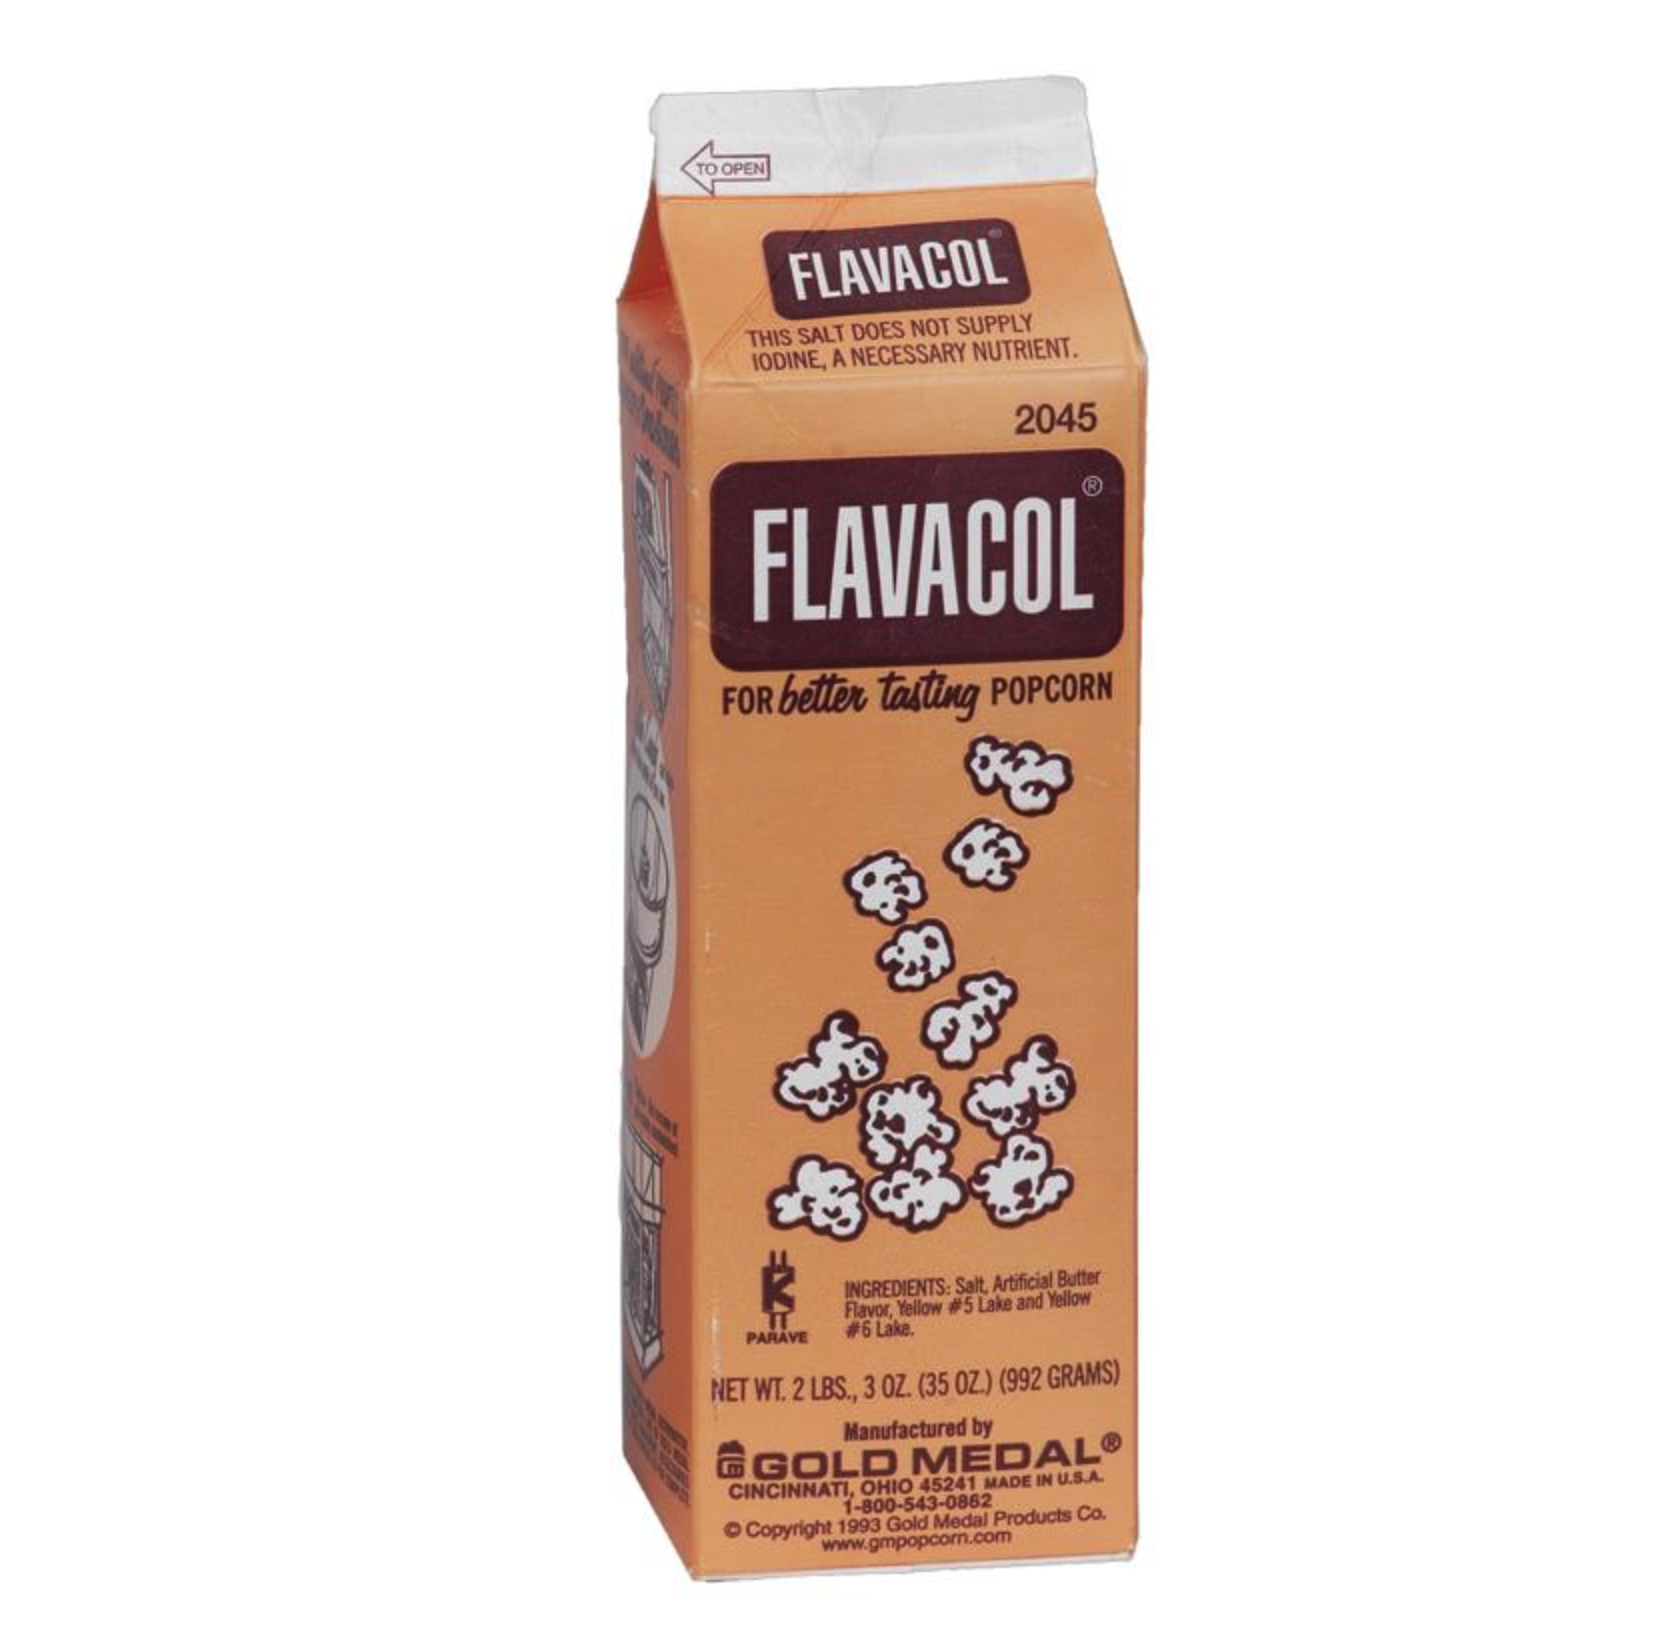 Page image for Flavacol packaging